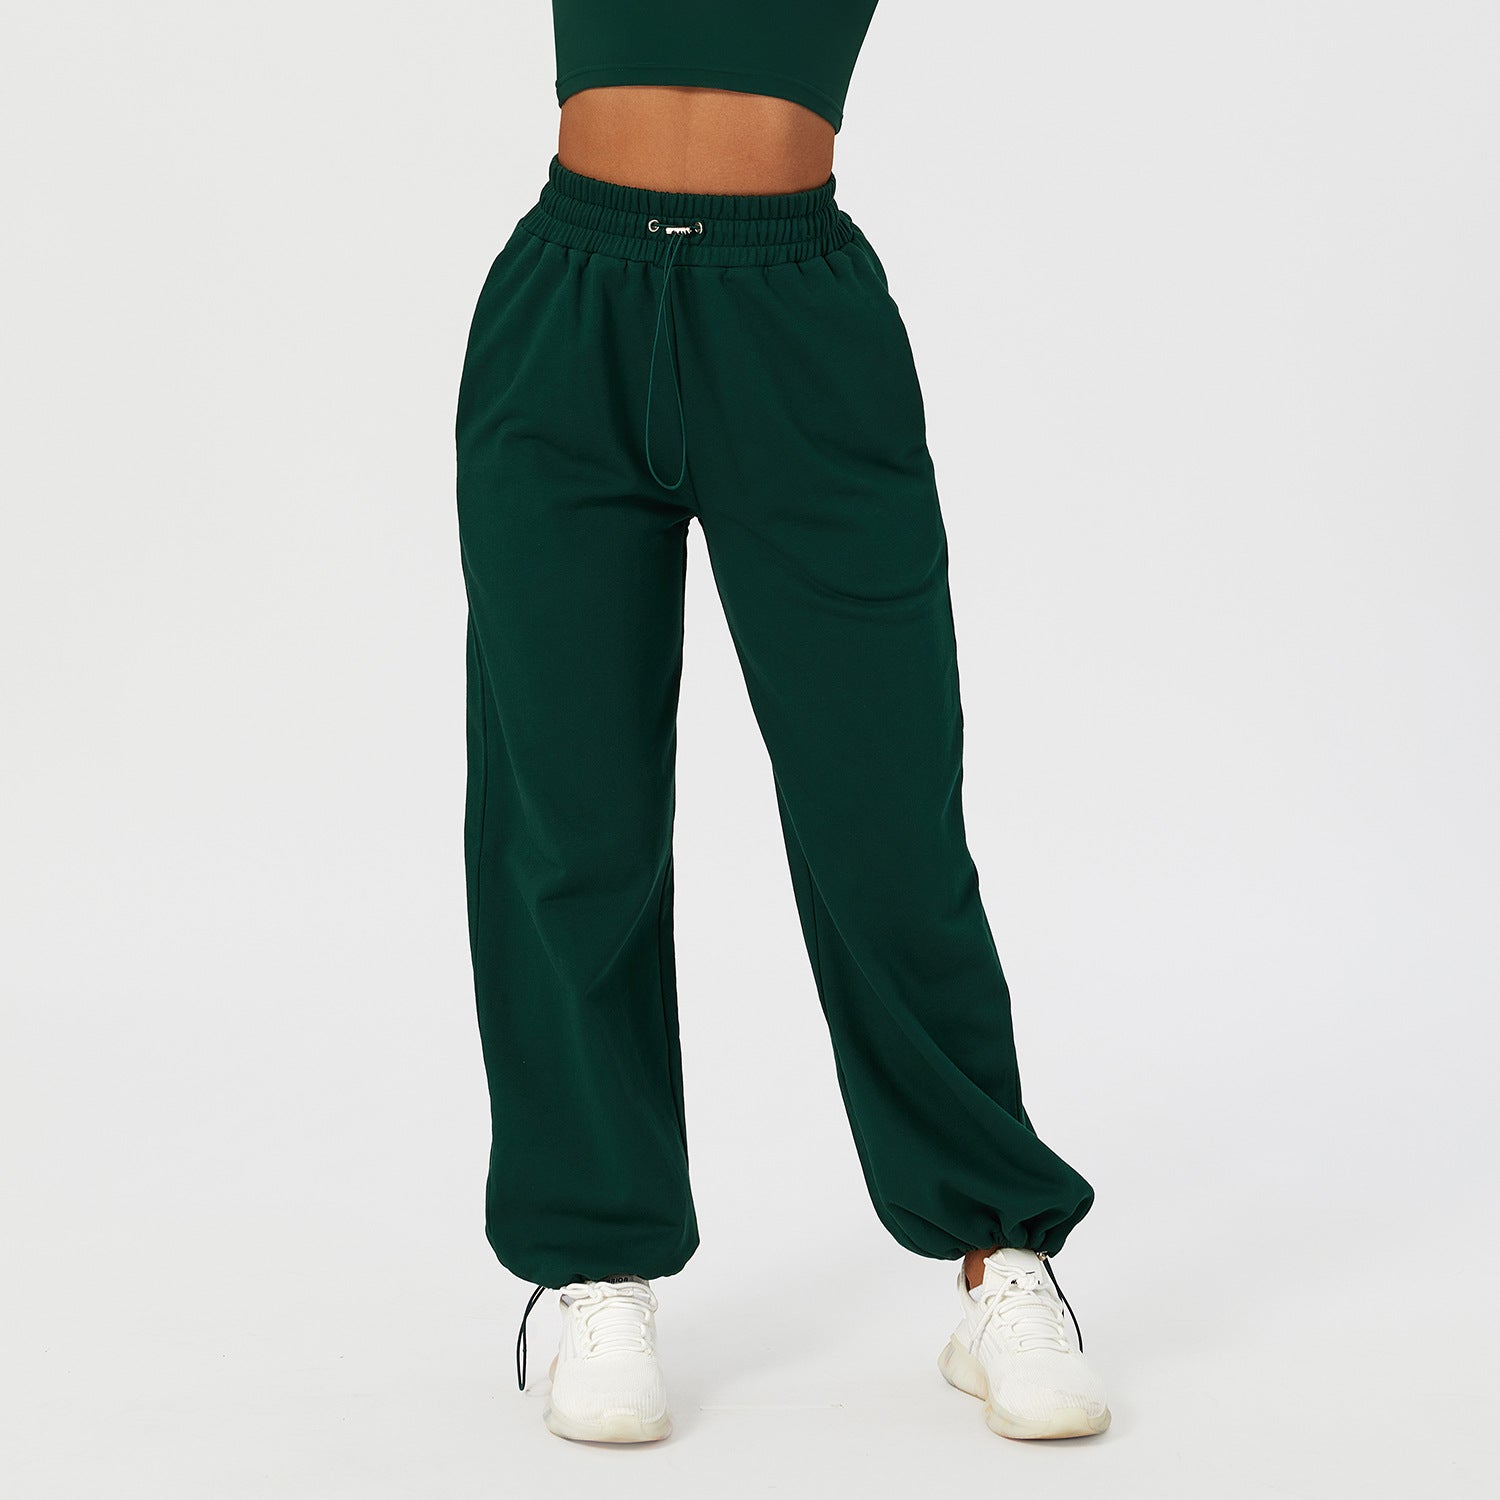 Women's Loose Bound Sports Pants - Trend Zone